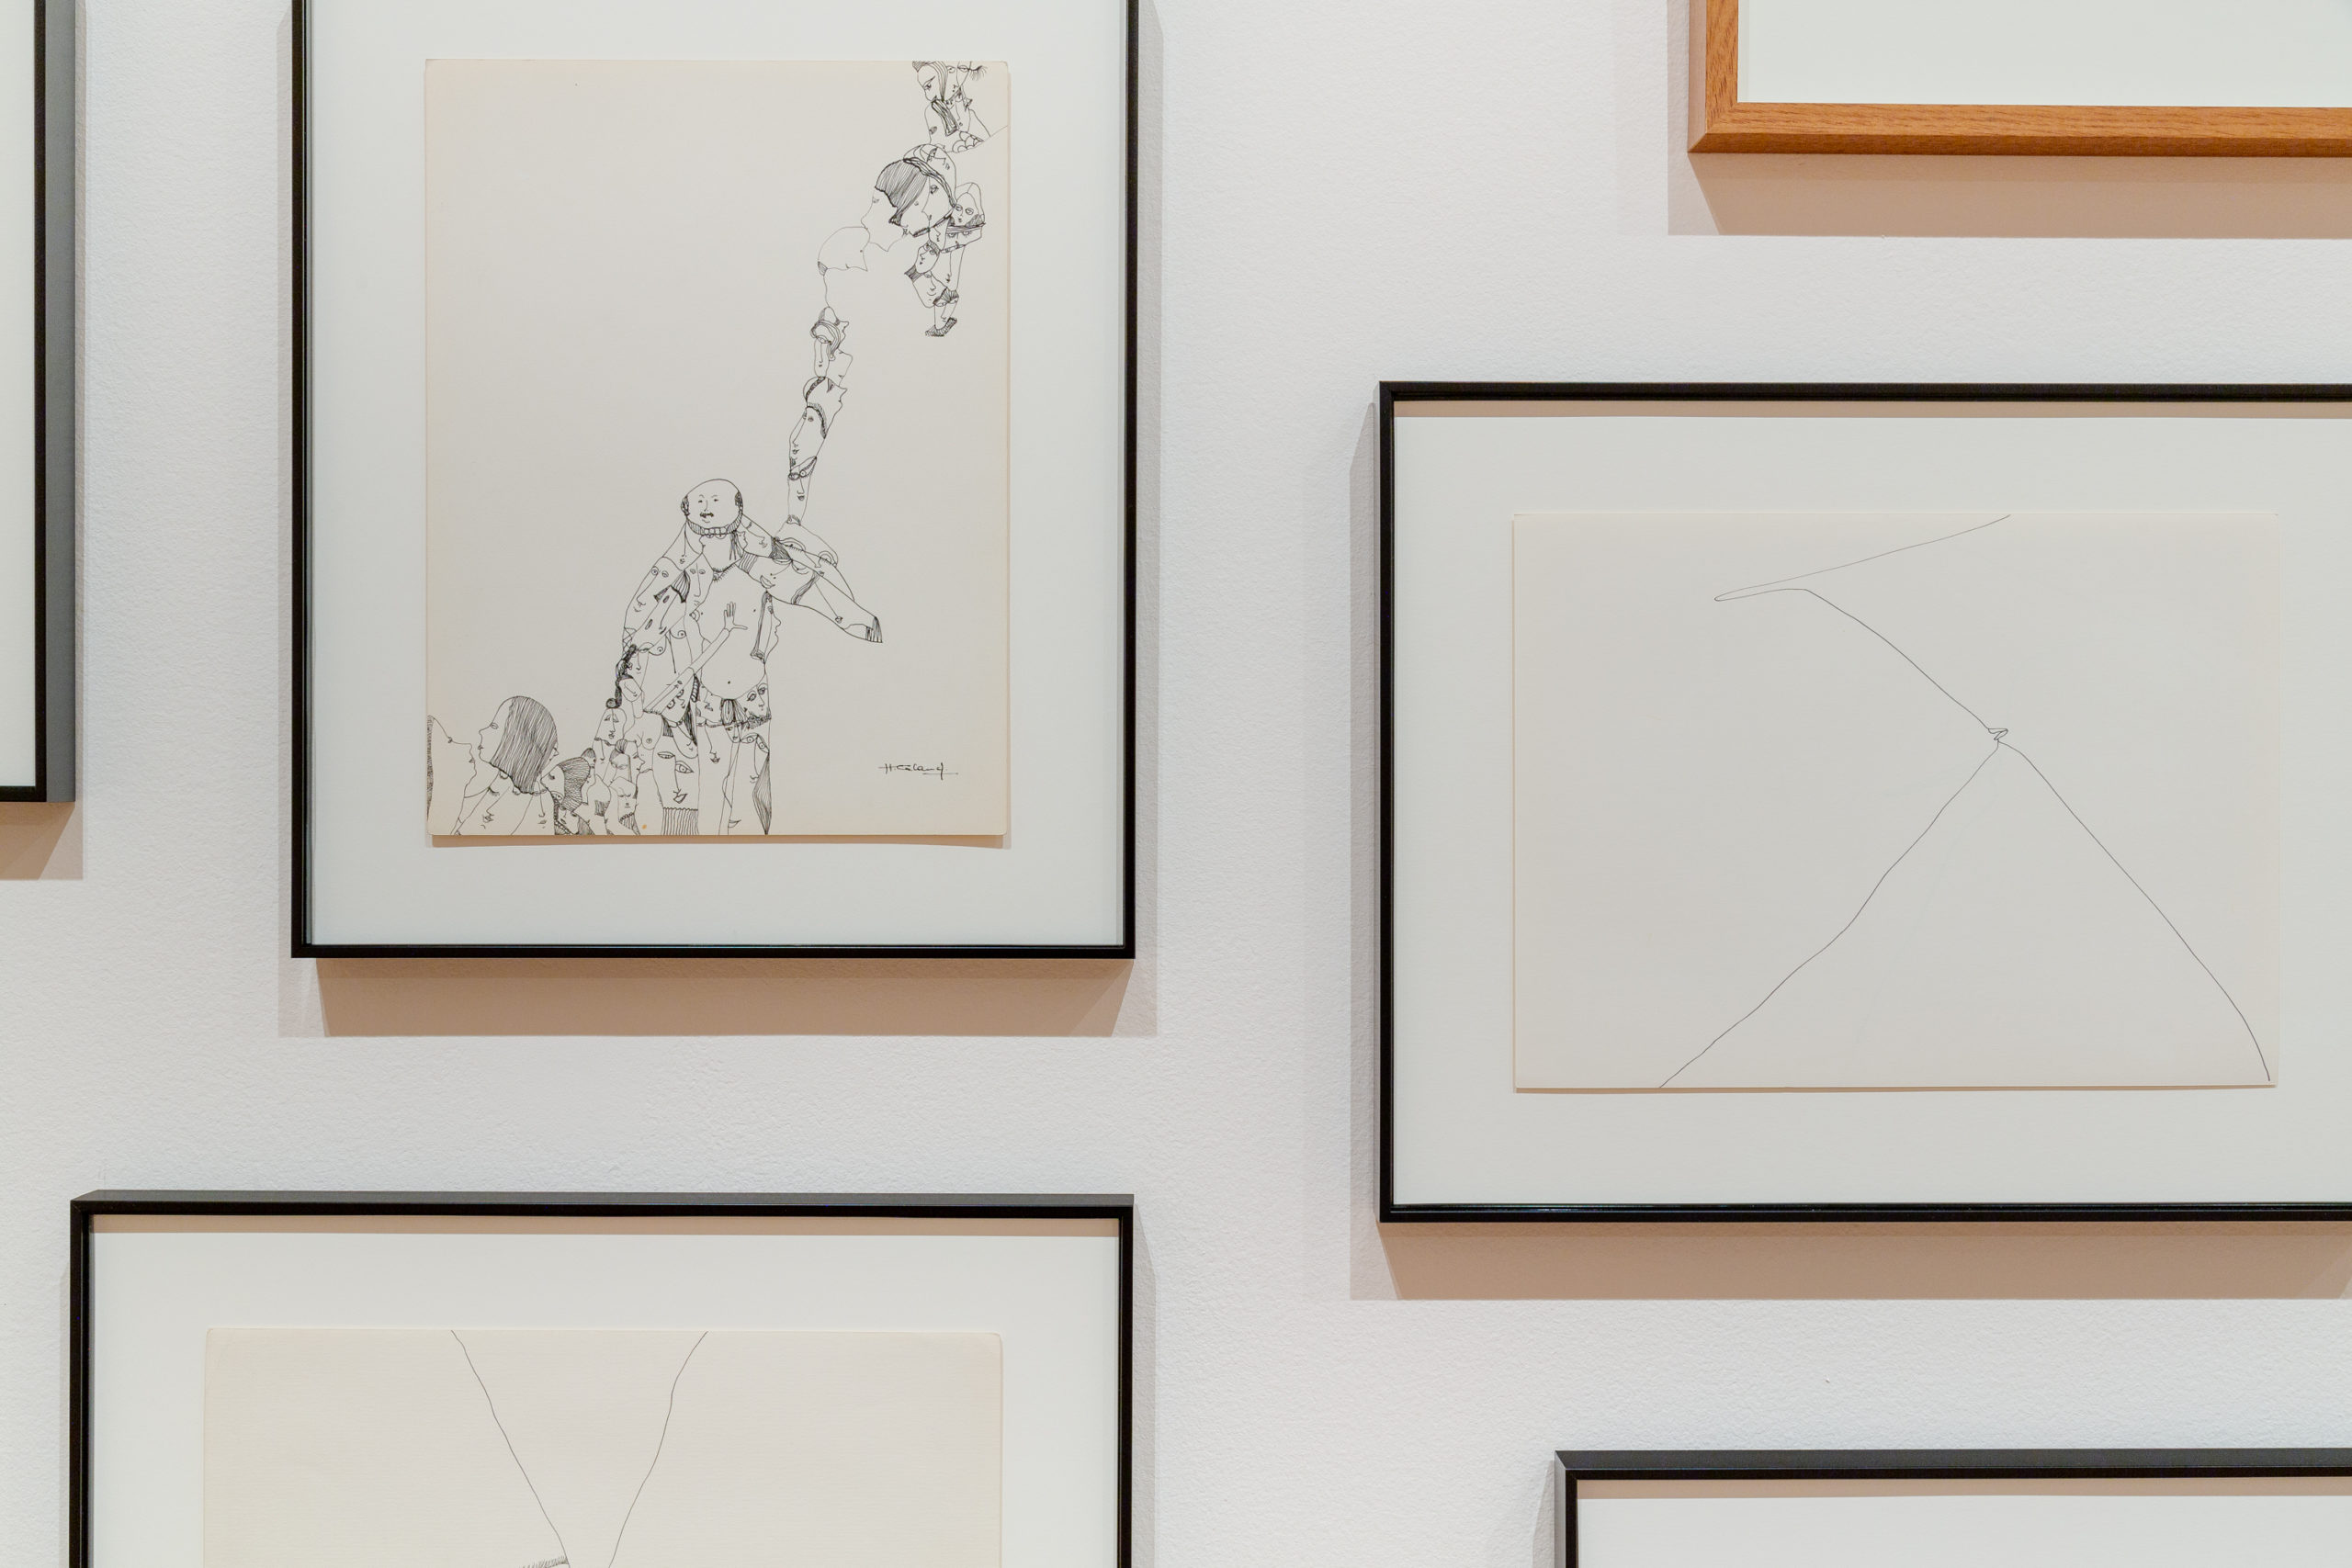 Art work is presented on white gallery walls in thin black frames.